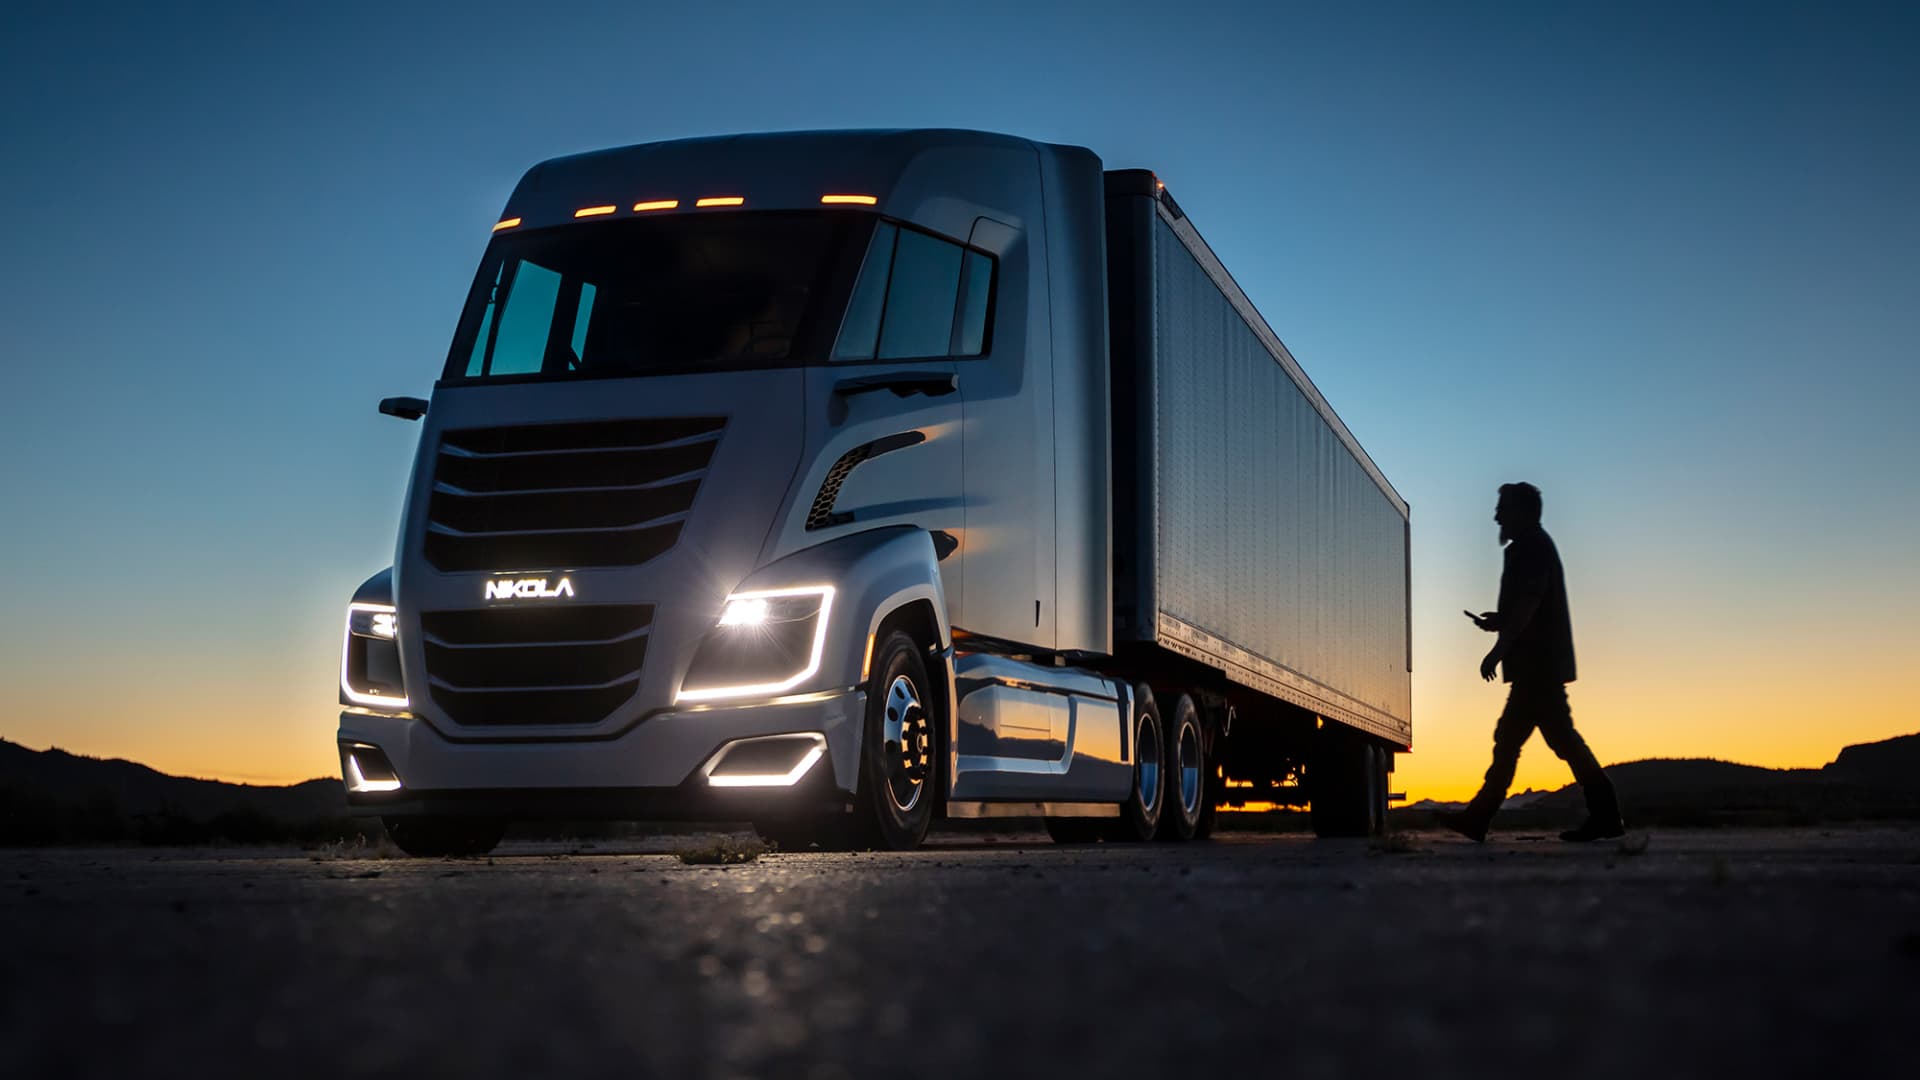 Nikola will offer a driver-assist system for its trucks starting next year